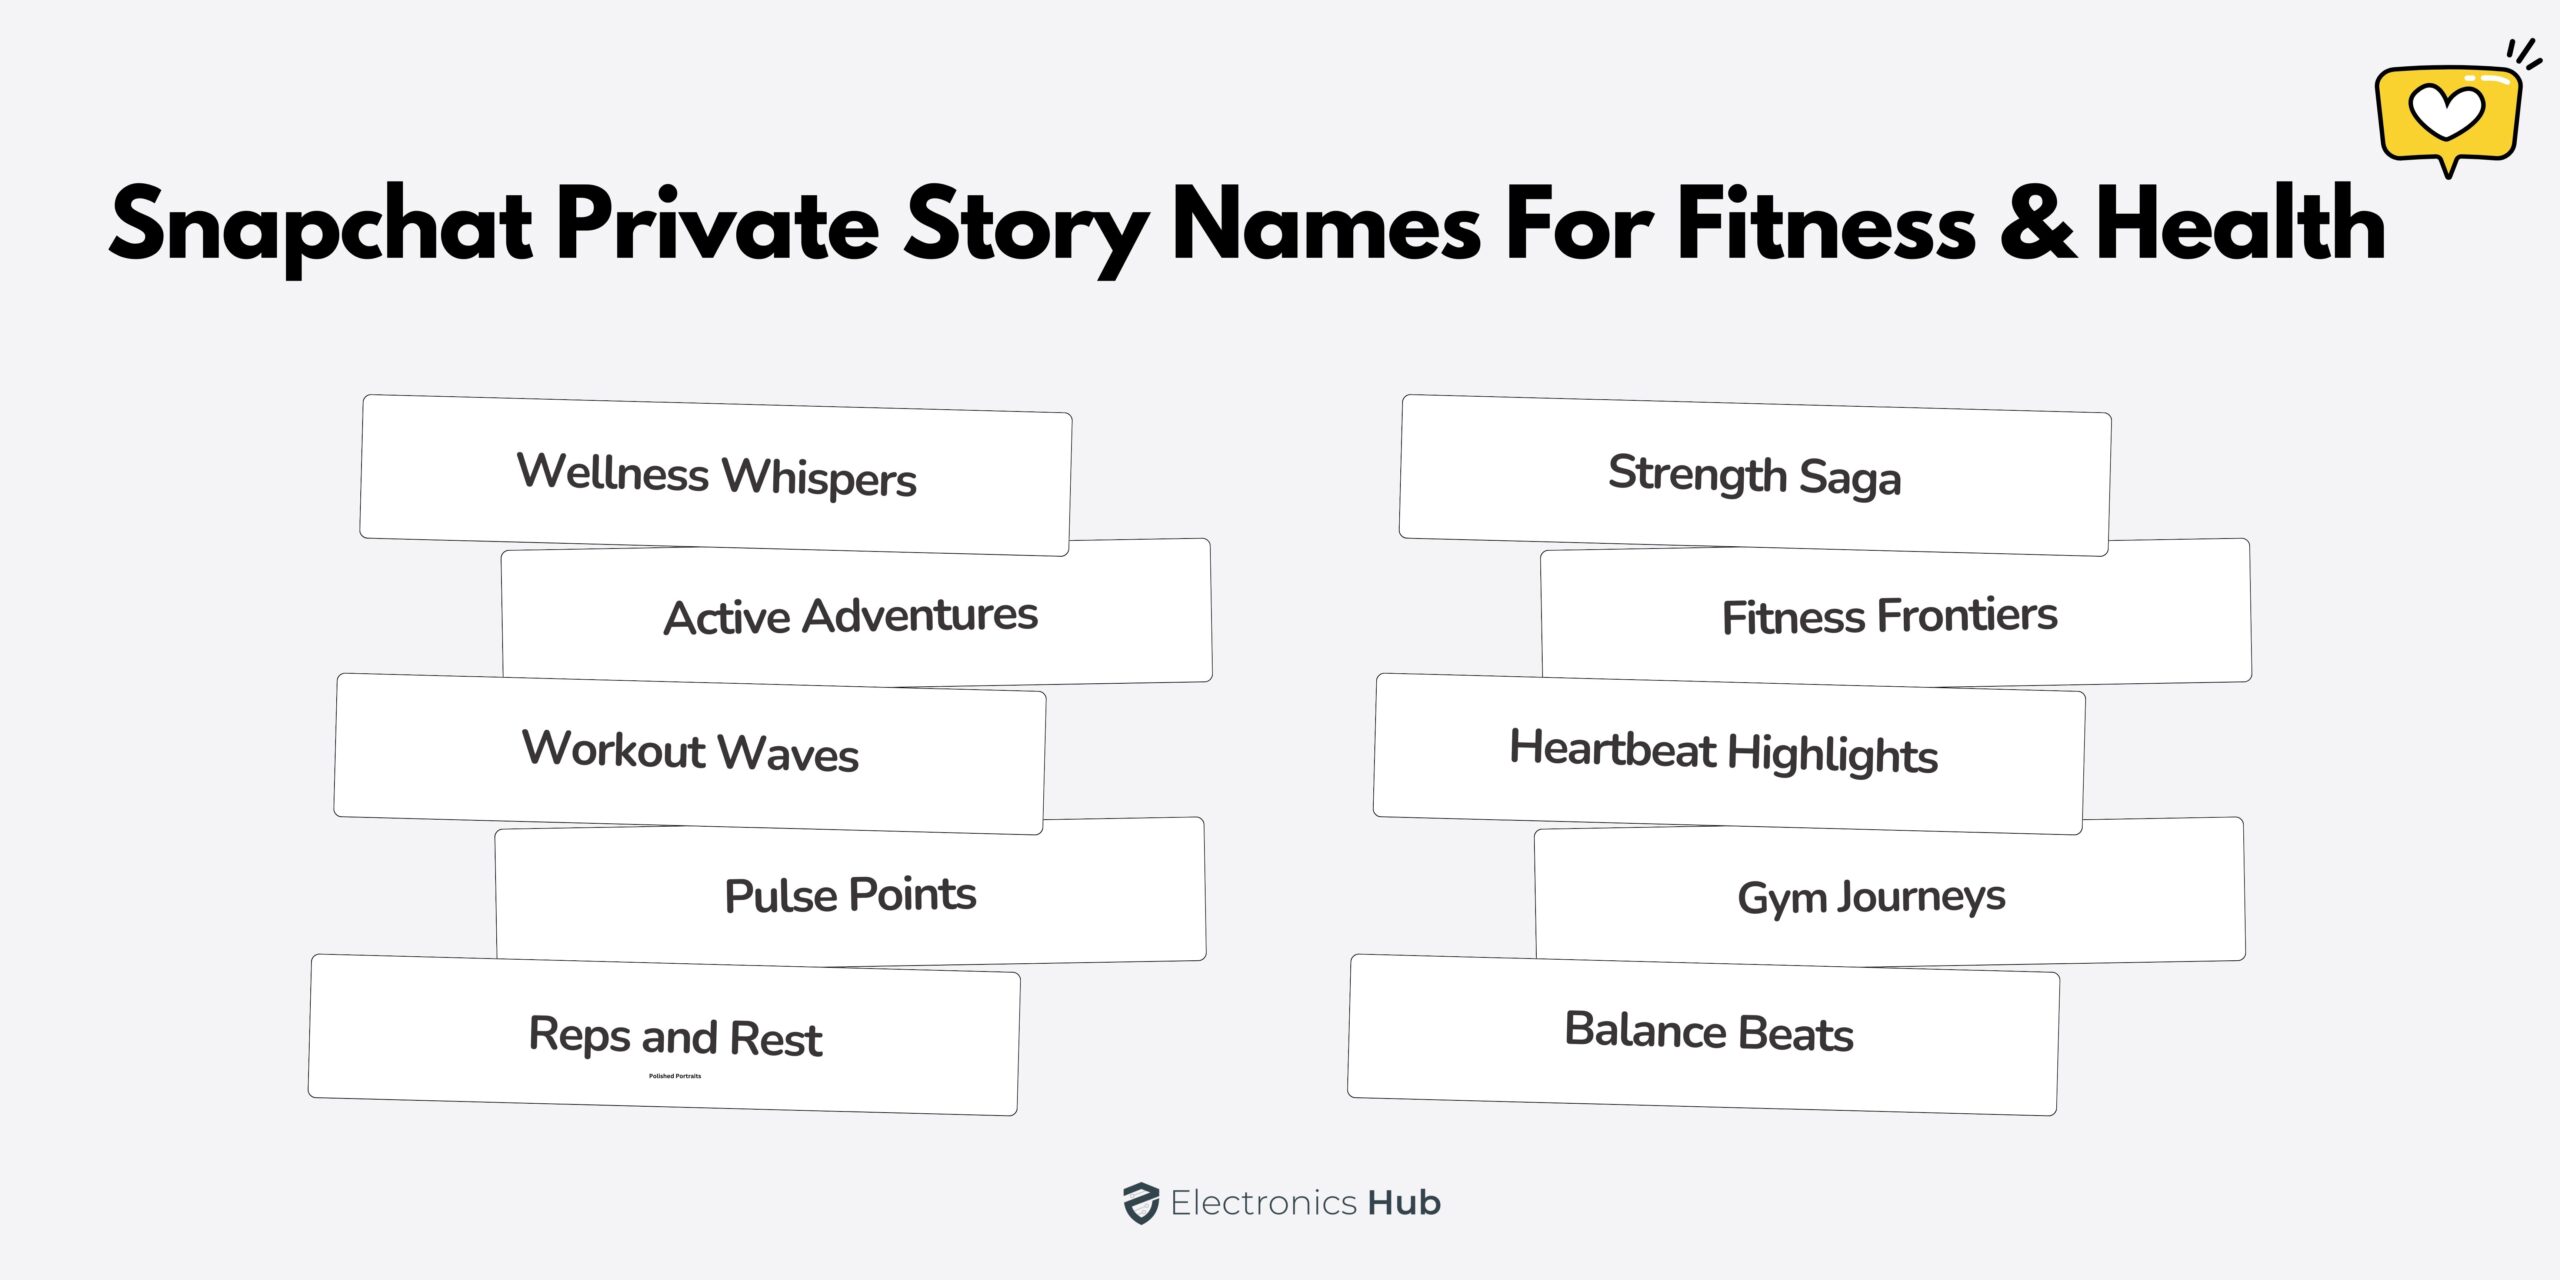 Snapchat Private Story Names for Fitness & Health